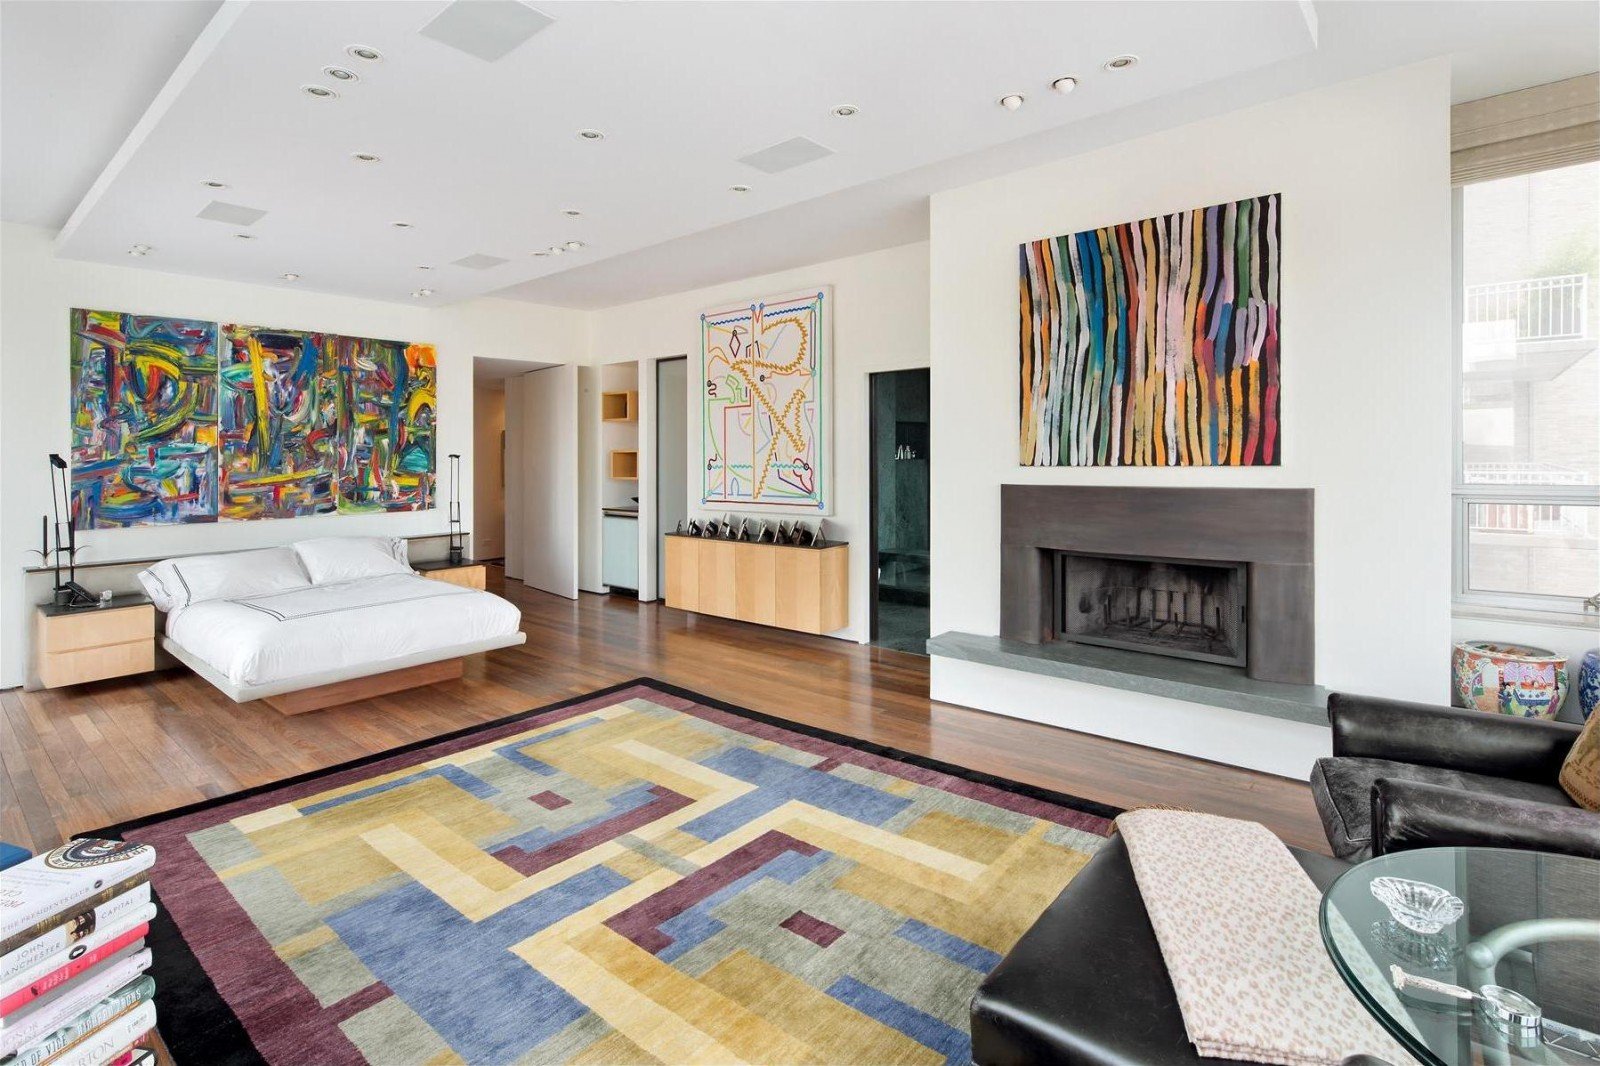 A unique bedroom with a fireplace and a colorful rug.